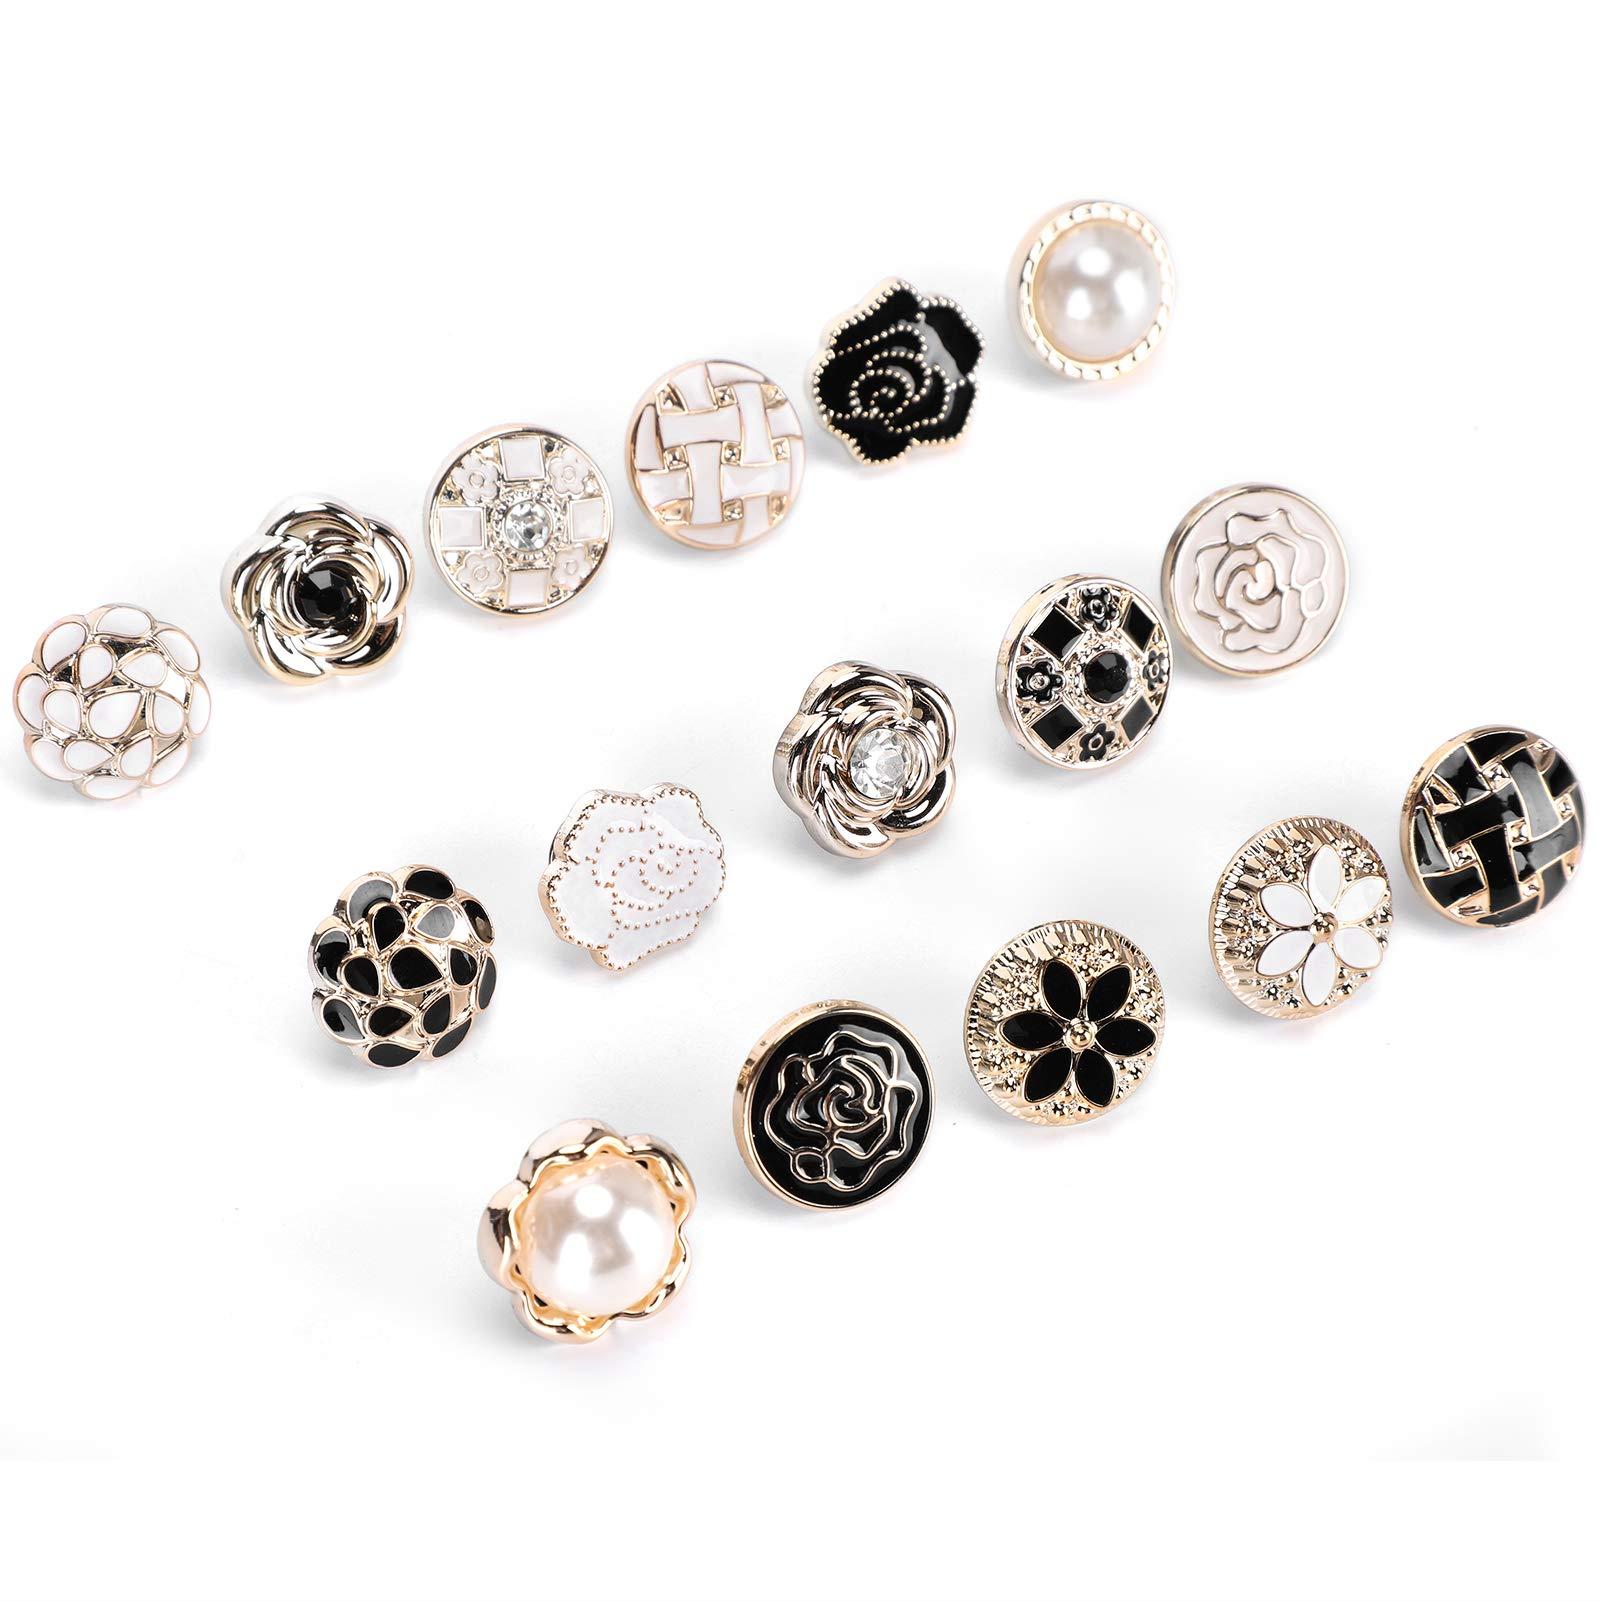 30 Pcs Collar Button Pins Without Nails, Small Fragrance Women's Coat Sweater Open Shirt Concealed Button